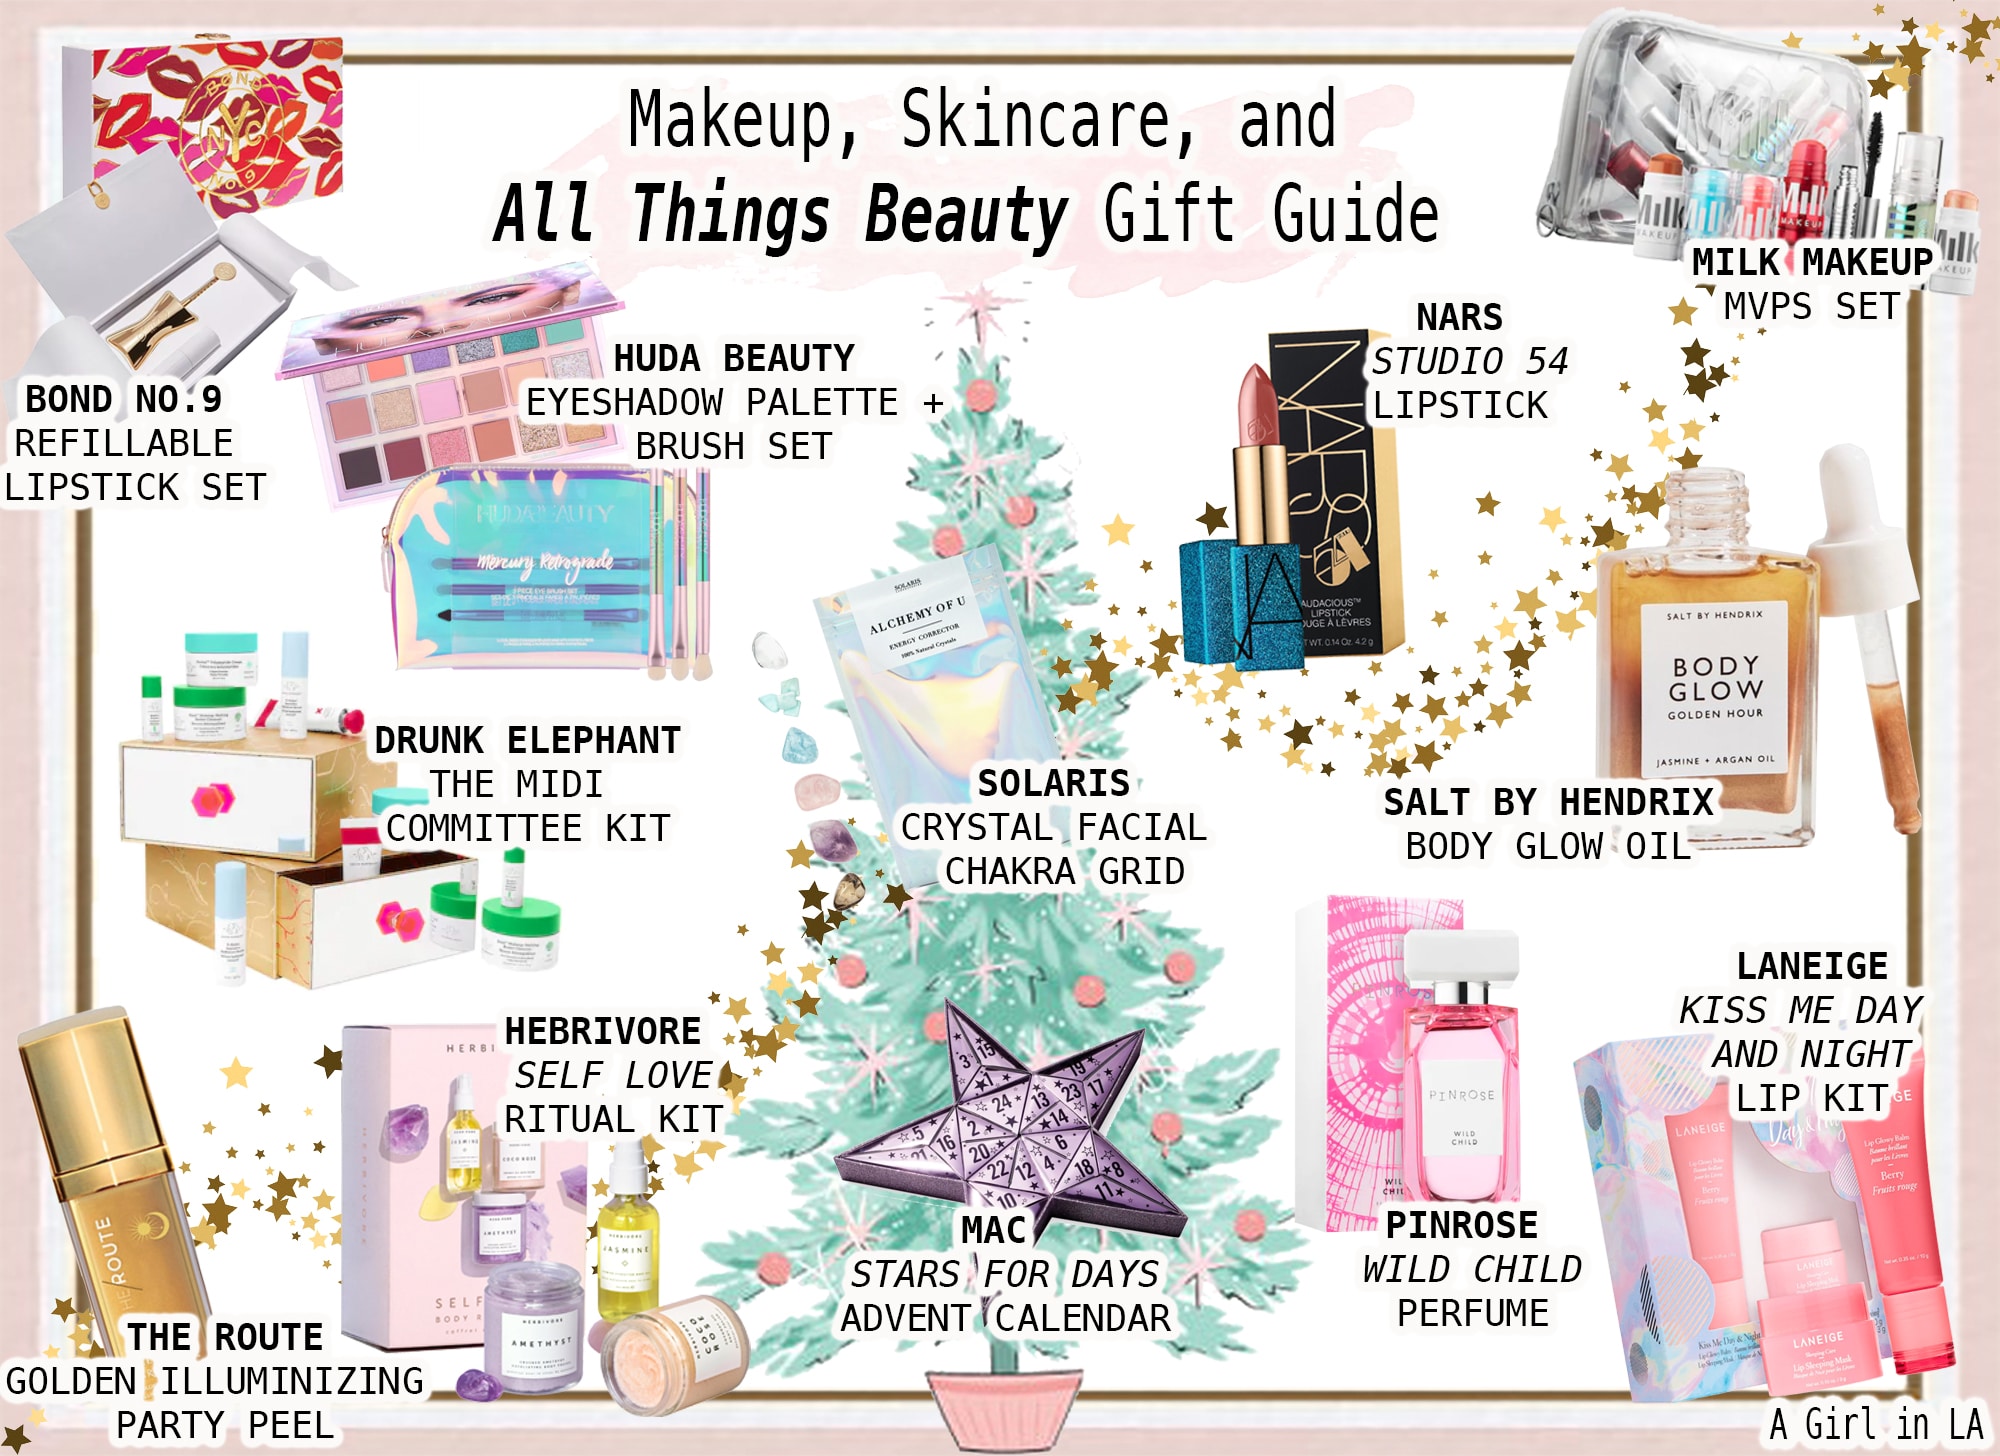 Makeup, Skincare, and All Things Beauty Gift Guide